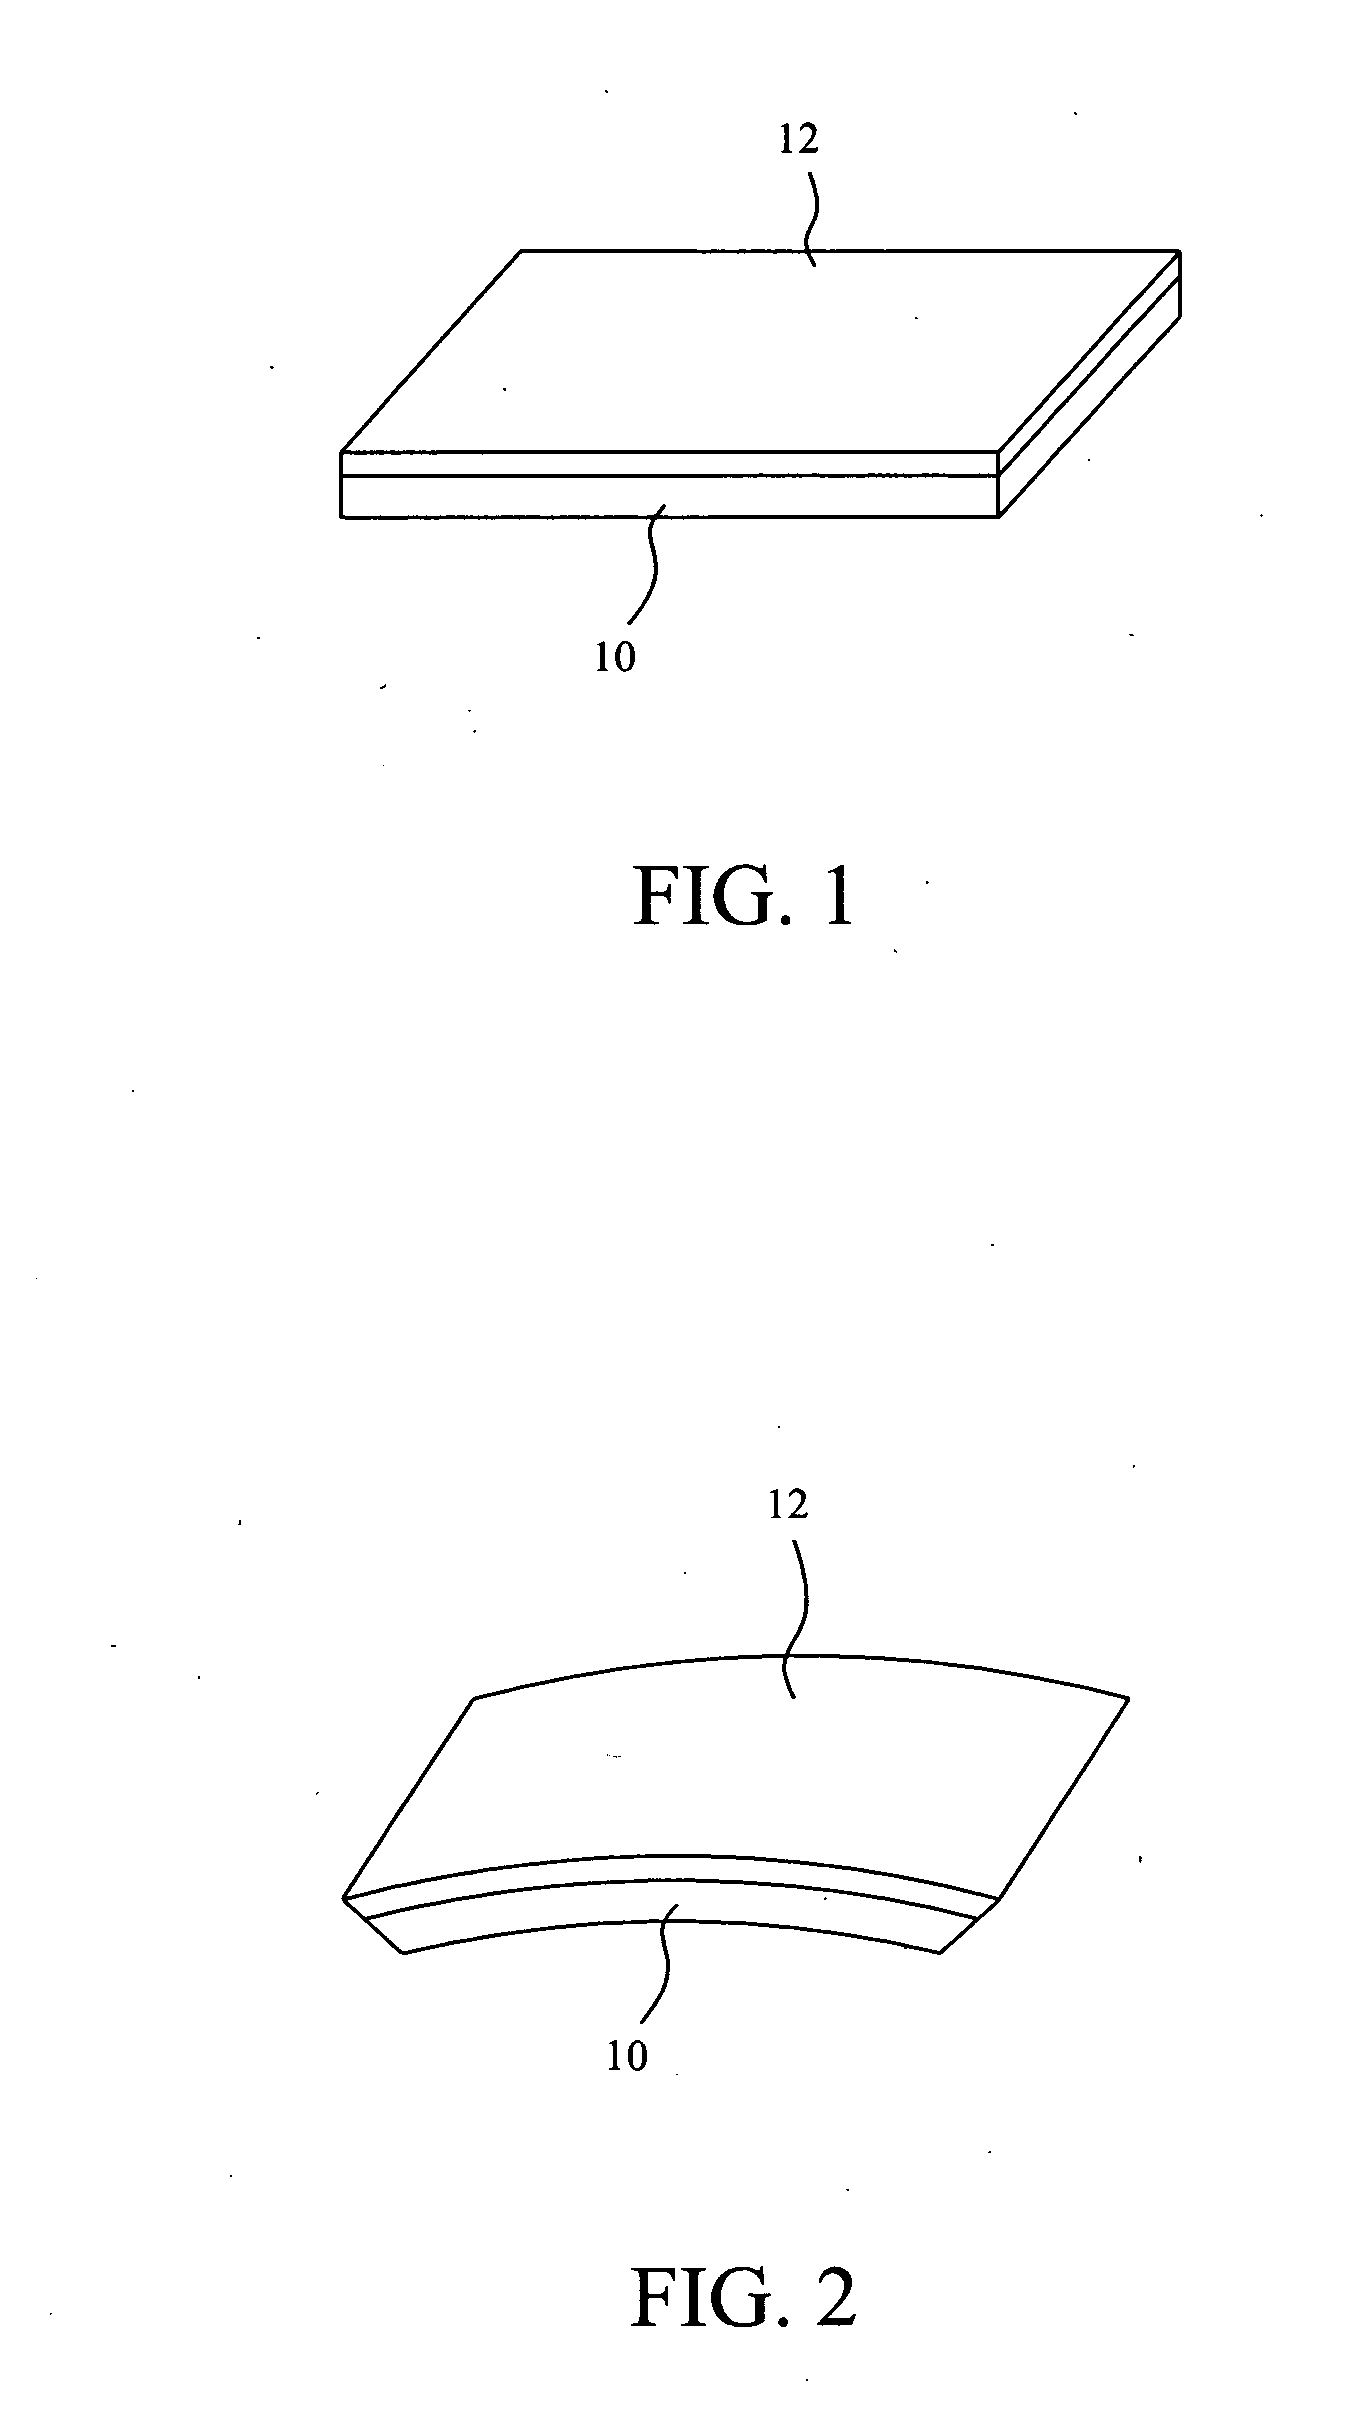 Touchpad having capability of inducing sensation of tactile key